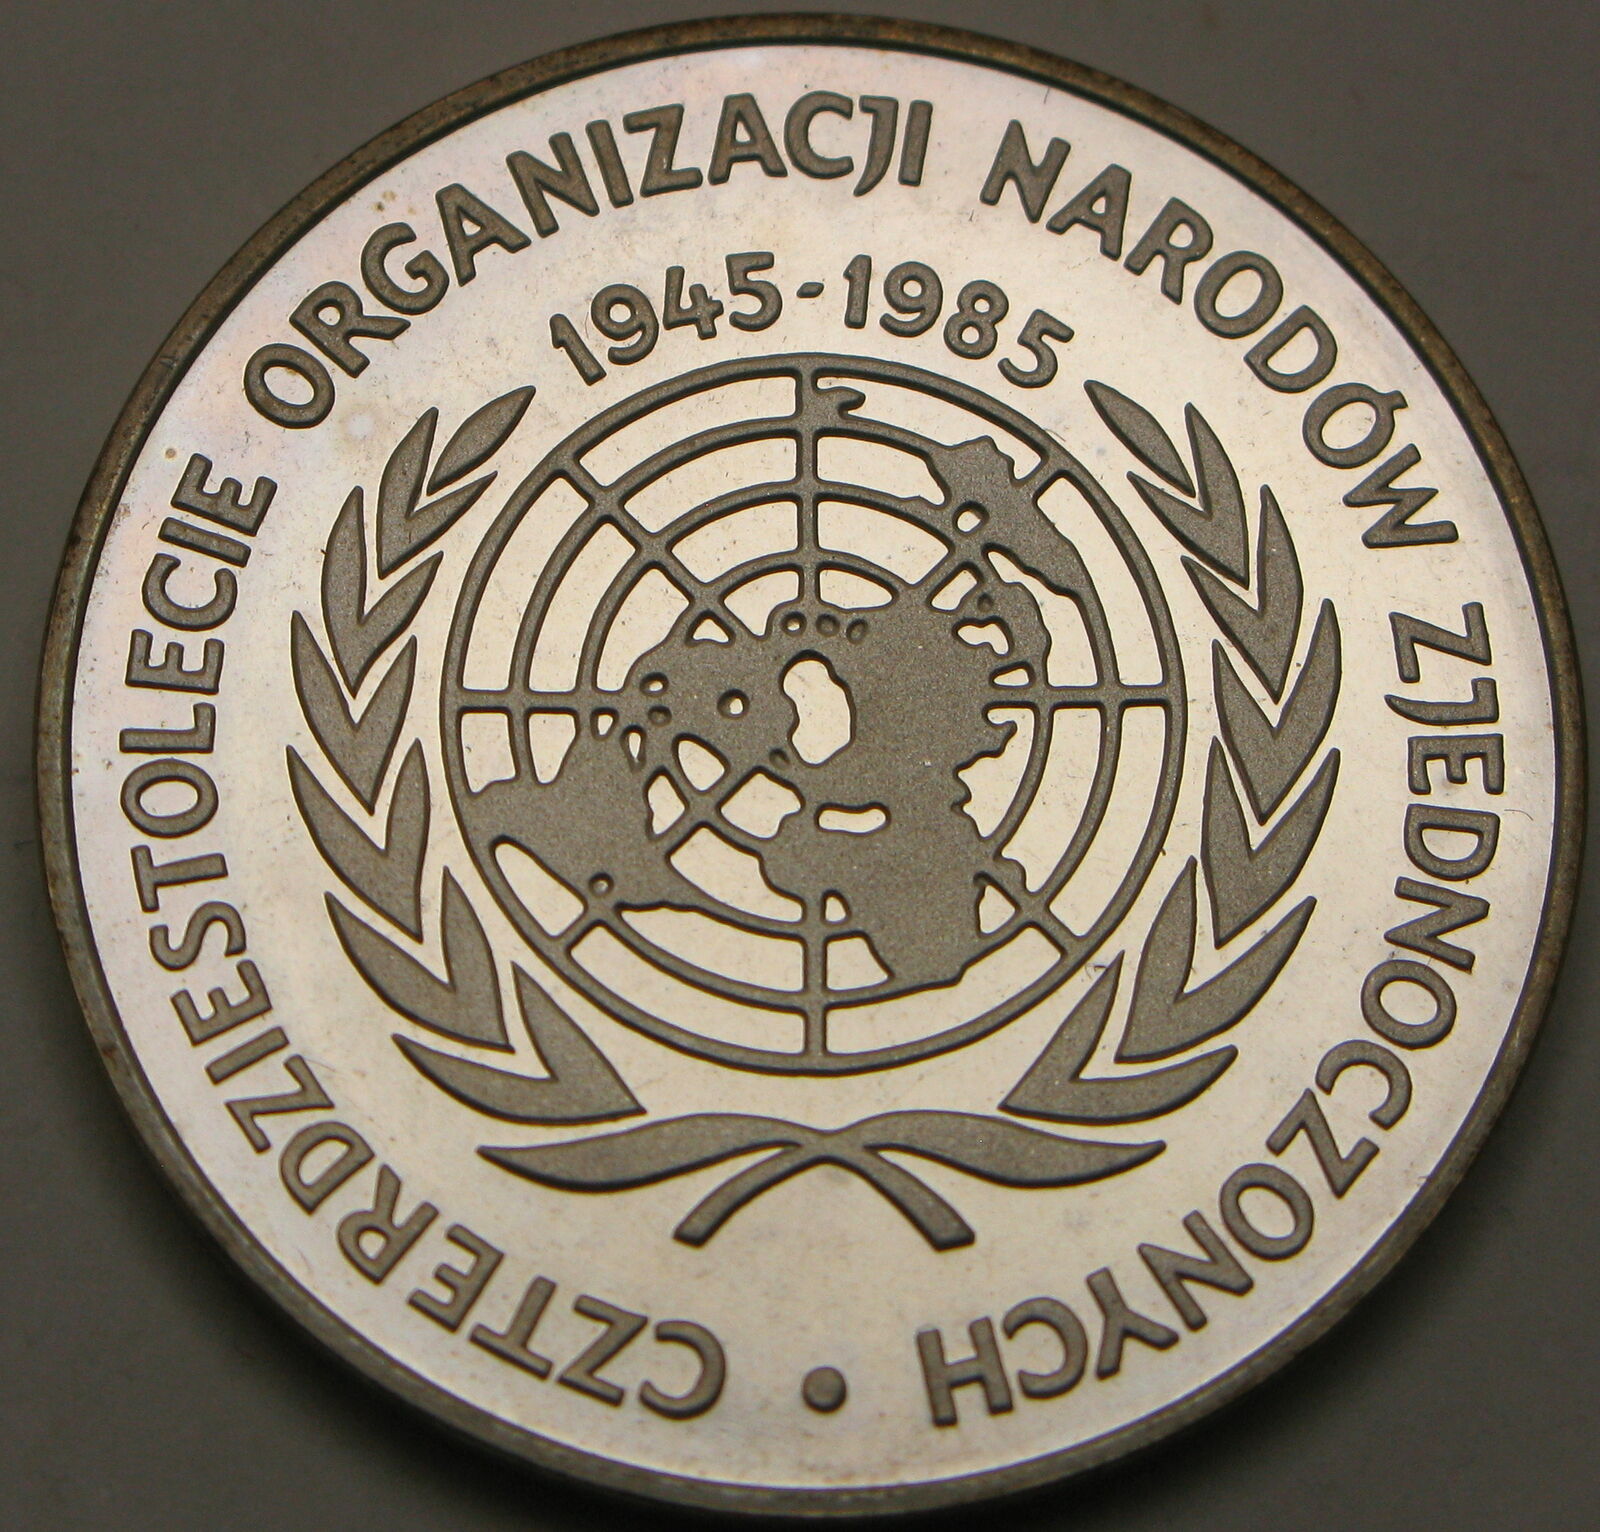 Poland 500 Zlotych 1985 Proof - Silver .750 - United Nations - 4083 ¤